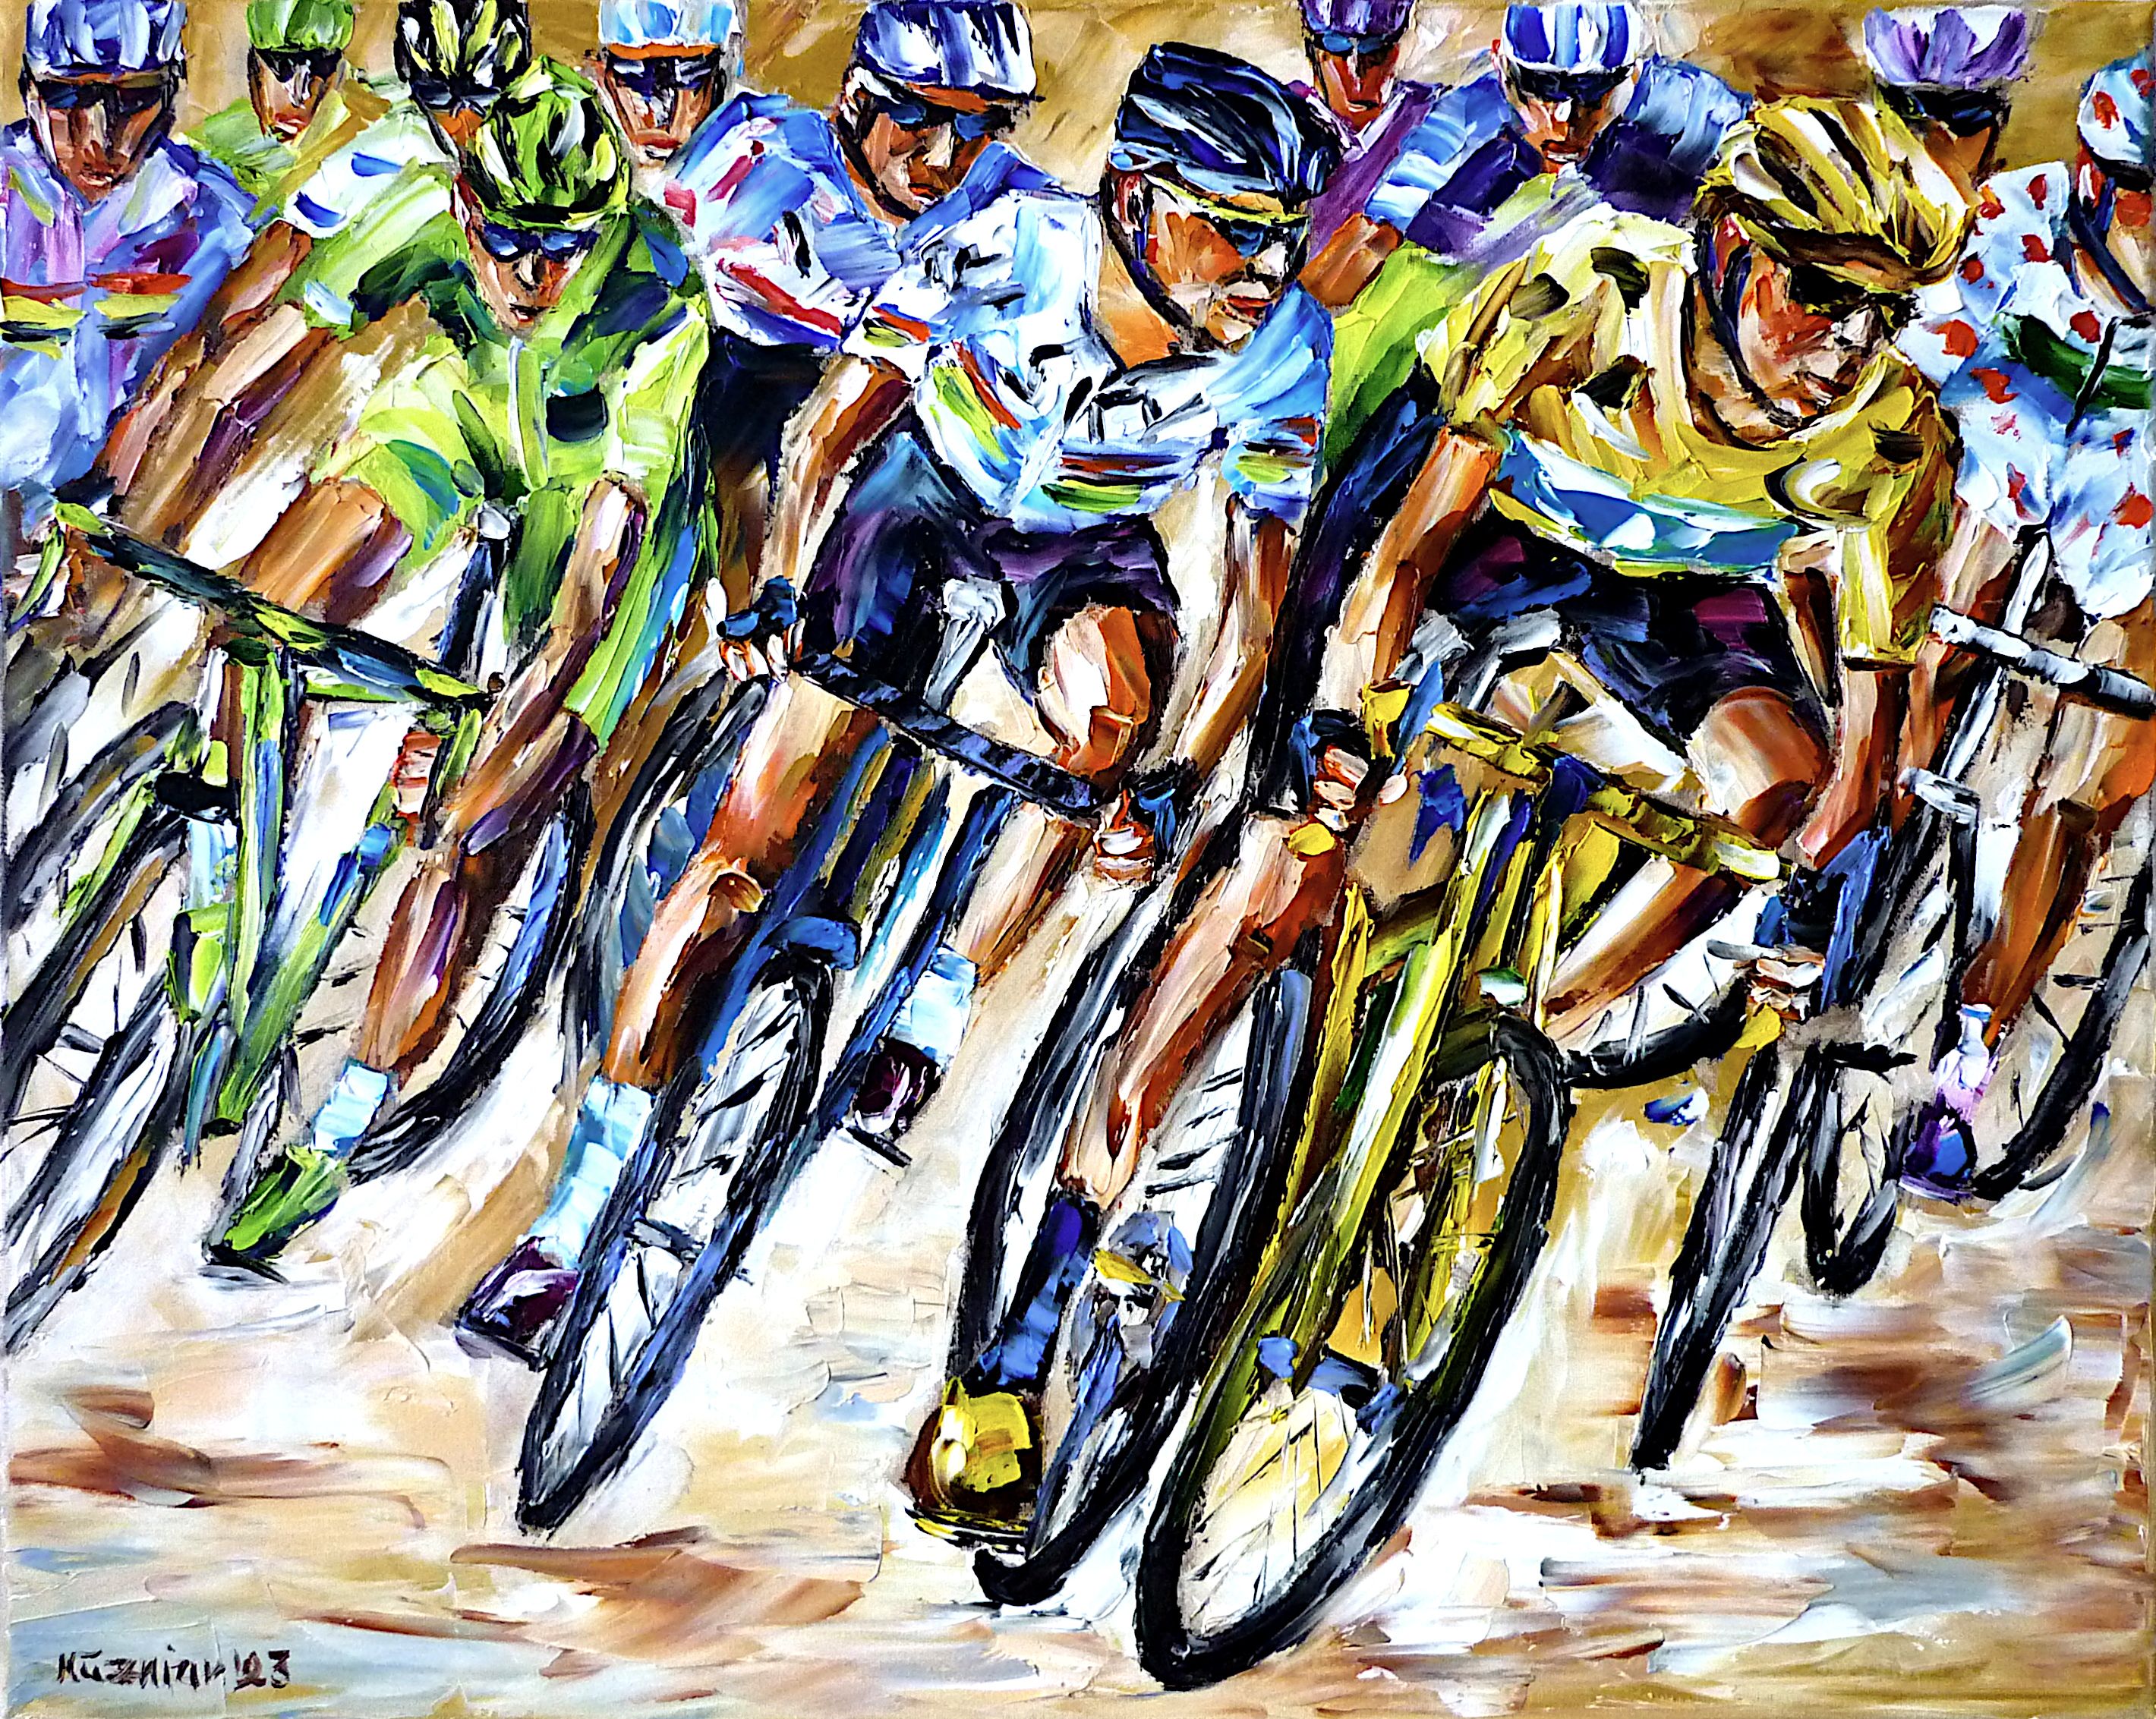 racing cyclists,bicycle race,road cyclist,road cycling,cyclist,cycle race,cycling,stage race,tour de france art,tour de france scene,yellow jersey,maillot jaune,tour de france painting,tour de france race,tour de france picture,tour de france fan,tour de france love,tour de france lover,racing,bicycle,bicycle art,bicycle love,bicycle fans,bicycle sport,sport painting,athlete,sport love,sport lover,i love sport,palette knife oil painting,modern art,figurative art,figurative painting,contemporary painting,abstract painting,lively colors,colorful painting,bright colors,impasto painting